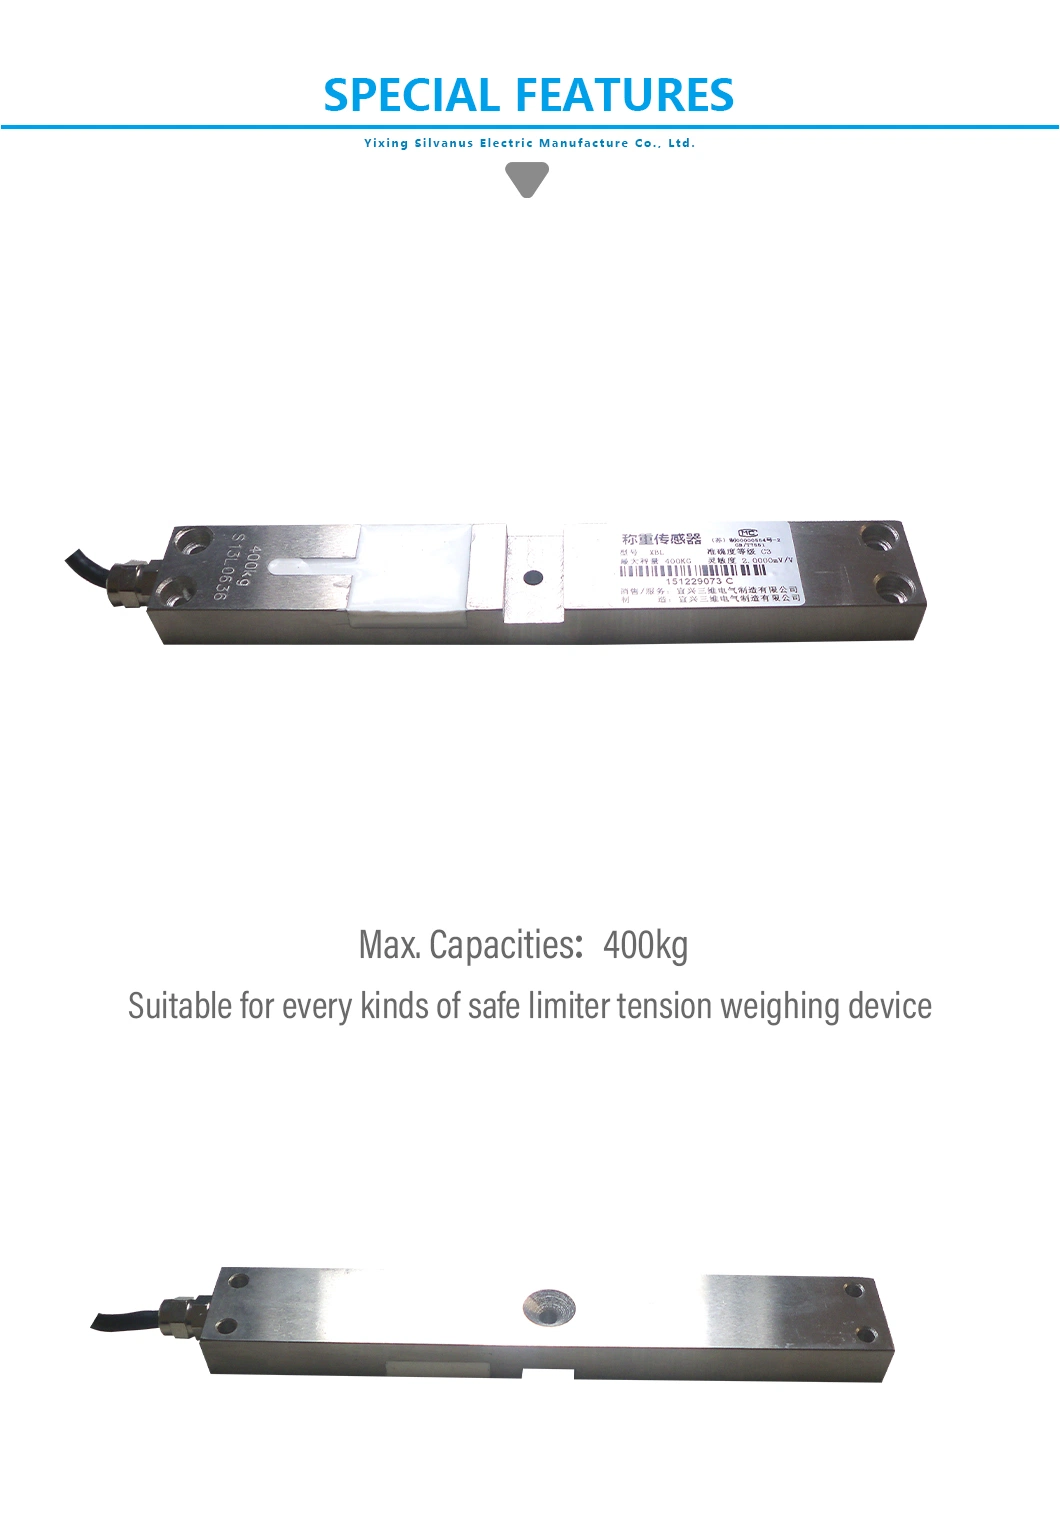 Manufacture Whole Overload Limiter CXA 400kg For Weighing Limiter